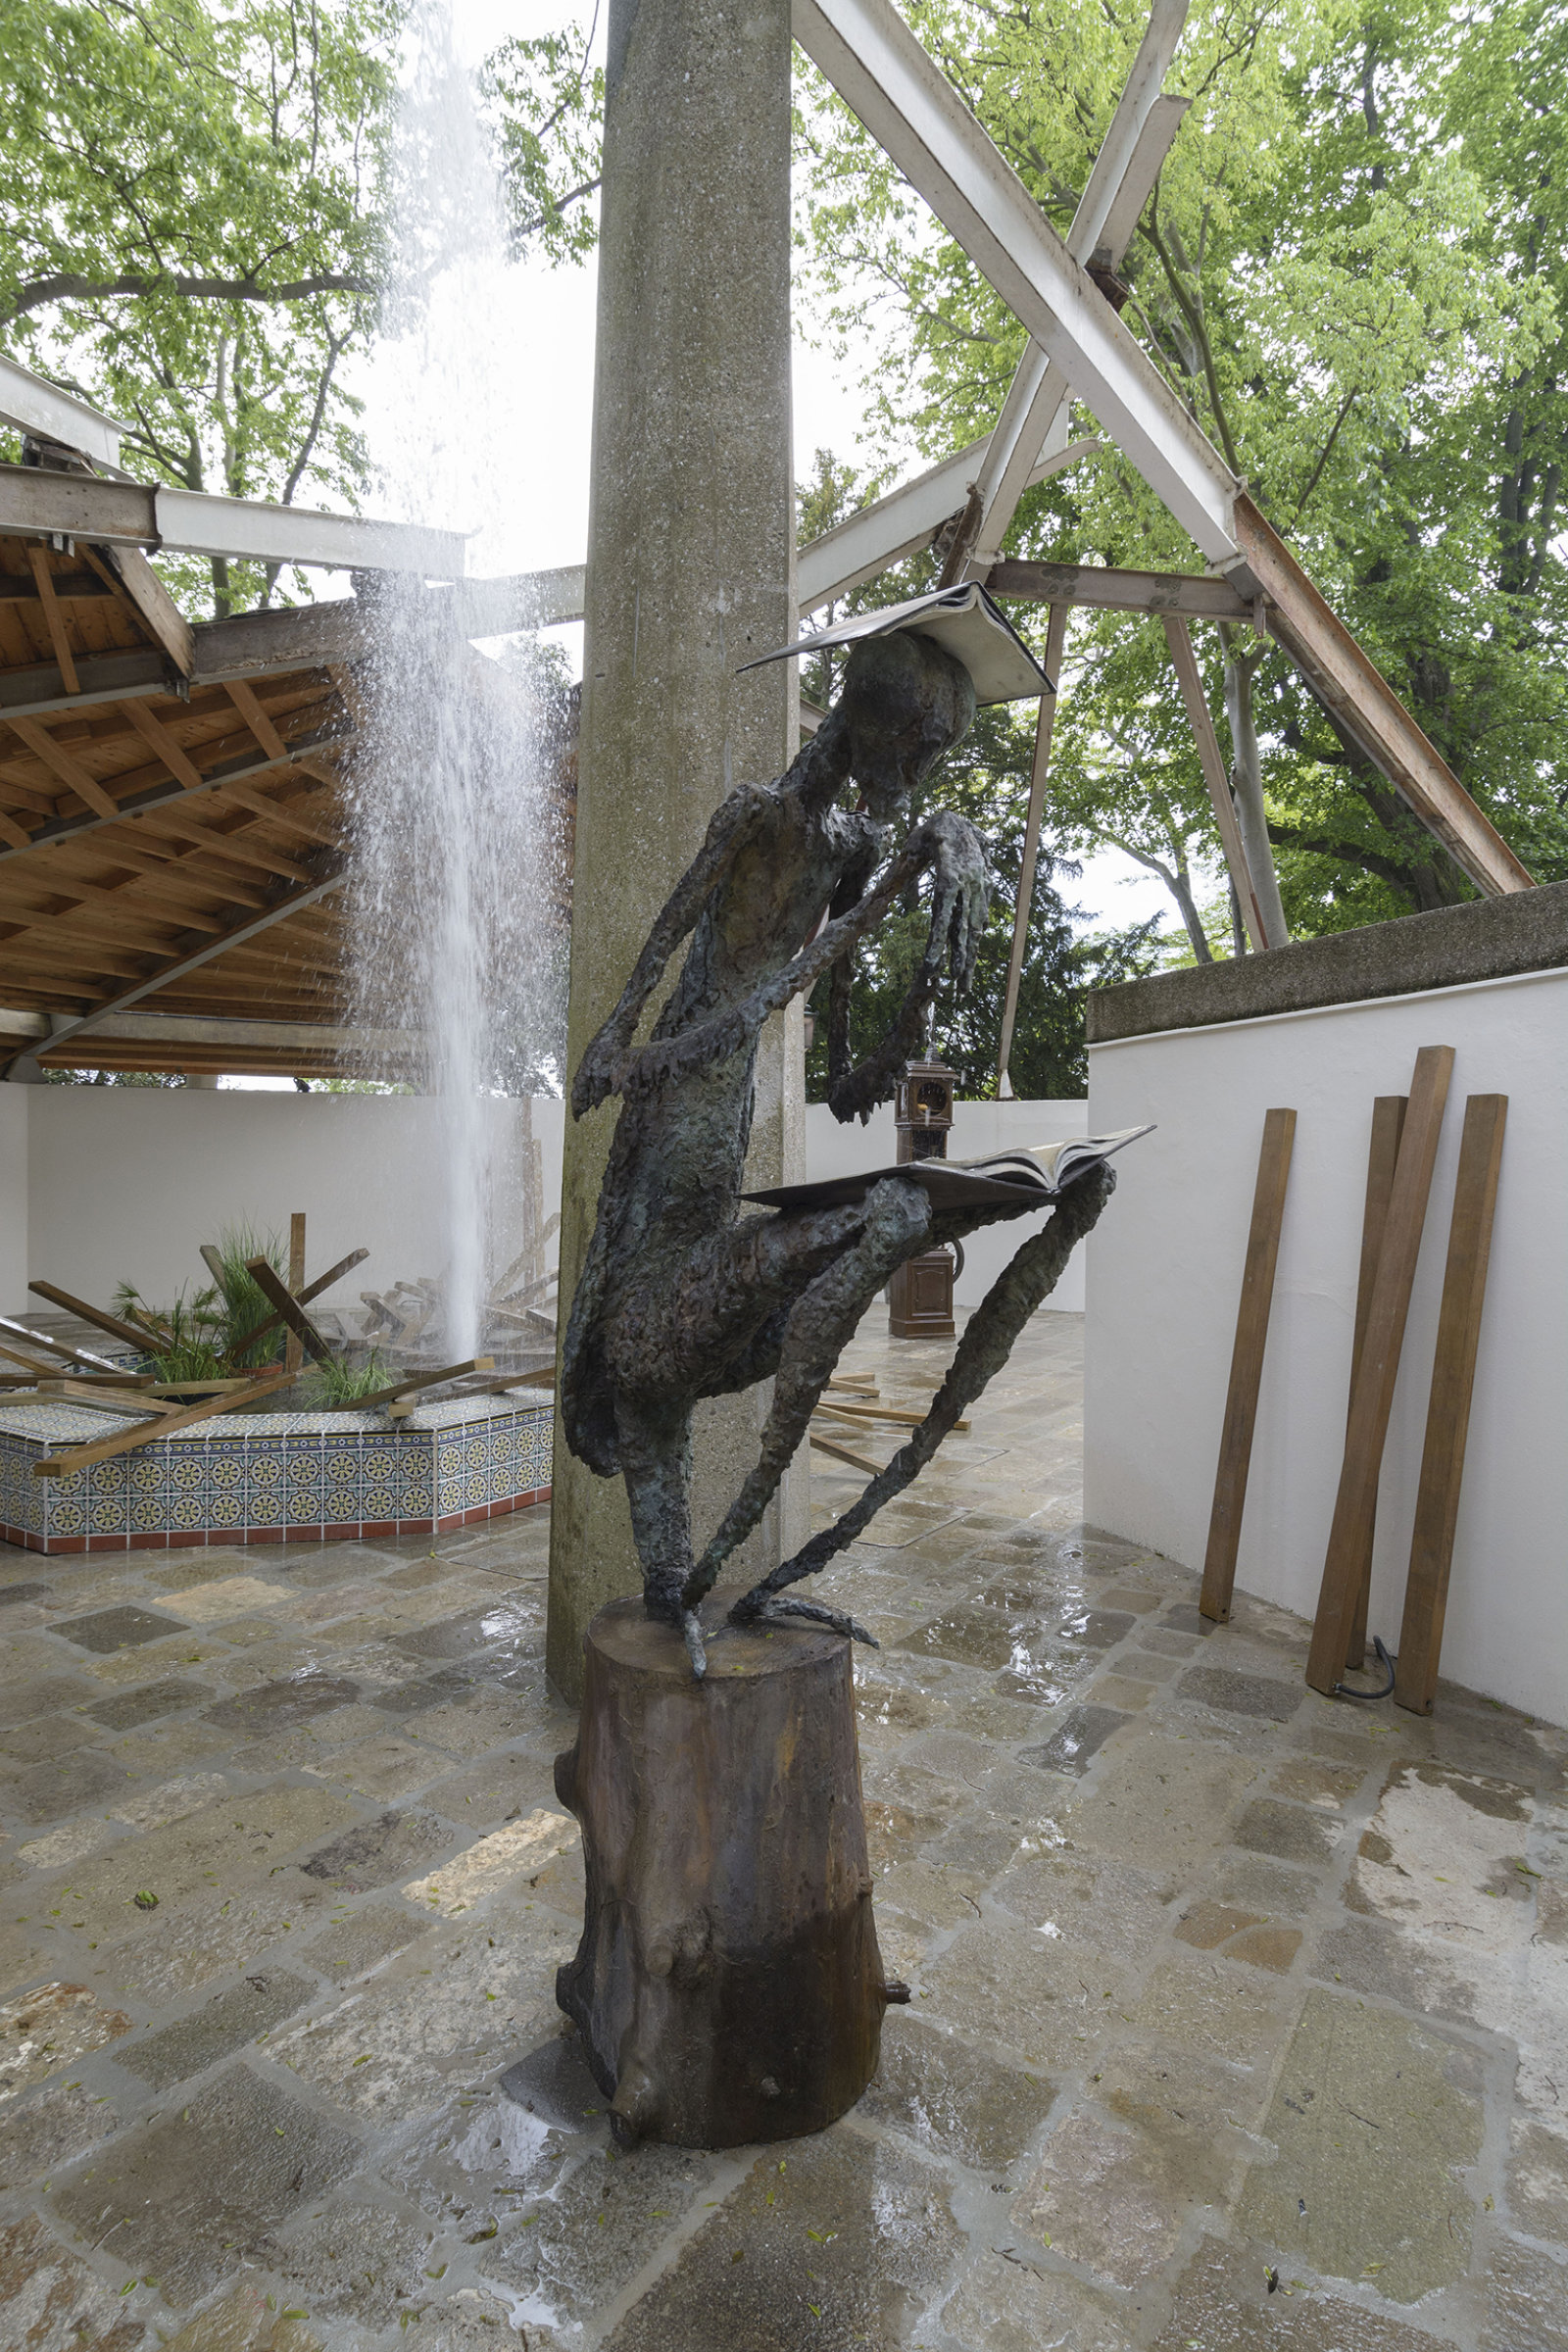 Geoffrey Farmer, Praying Mantis, 2017, cast bronze, waterworks, 97 x 35 x 48 in. (246 x 88 x 123 cm). Installation view, A way out of the mirror, Canada Pavilion, 57th Venice Biennale, Venice, Italy